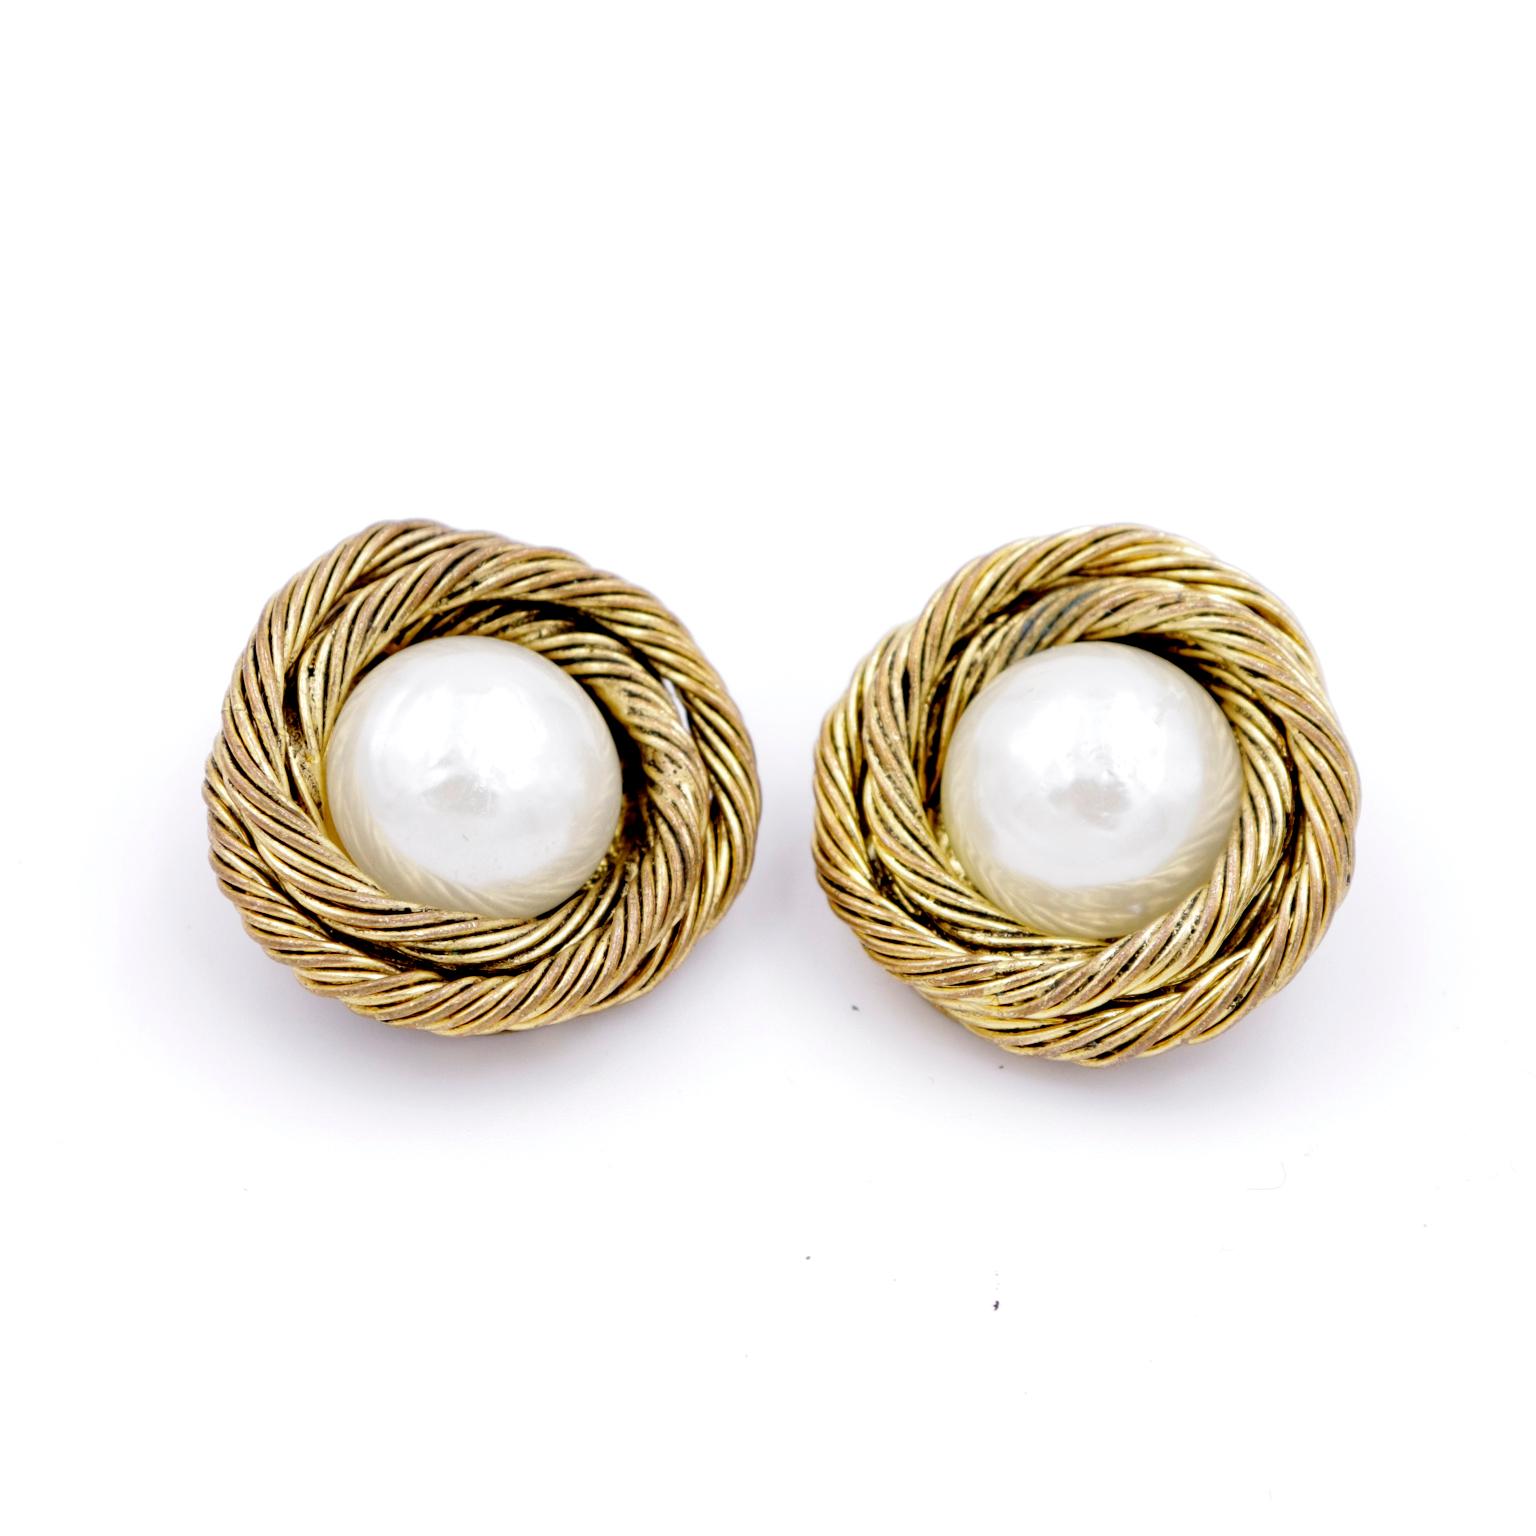 These vintage 1985 Chanel Twisted rope gold gilded clip earrings feature a center simulated pearl cabochon. The earrings have the 1985 Chanel mark on the back and come with their original box
WIDTH: 1 1/8